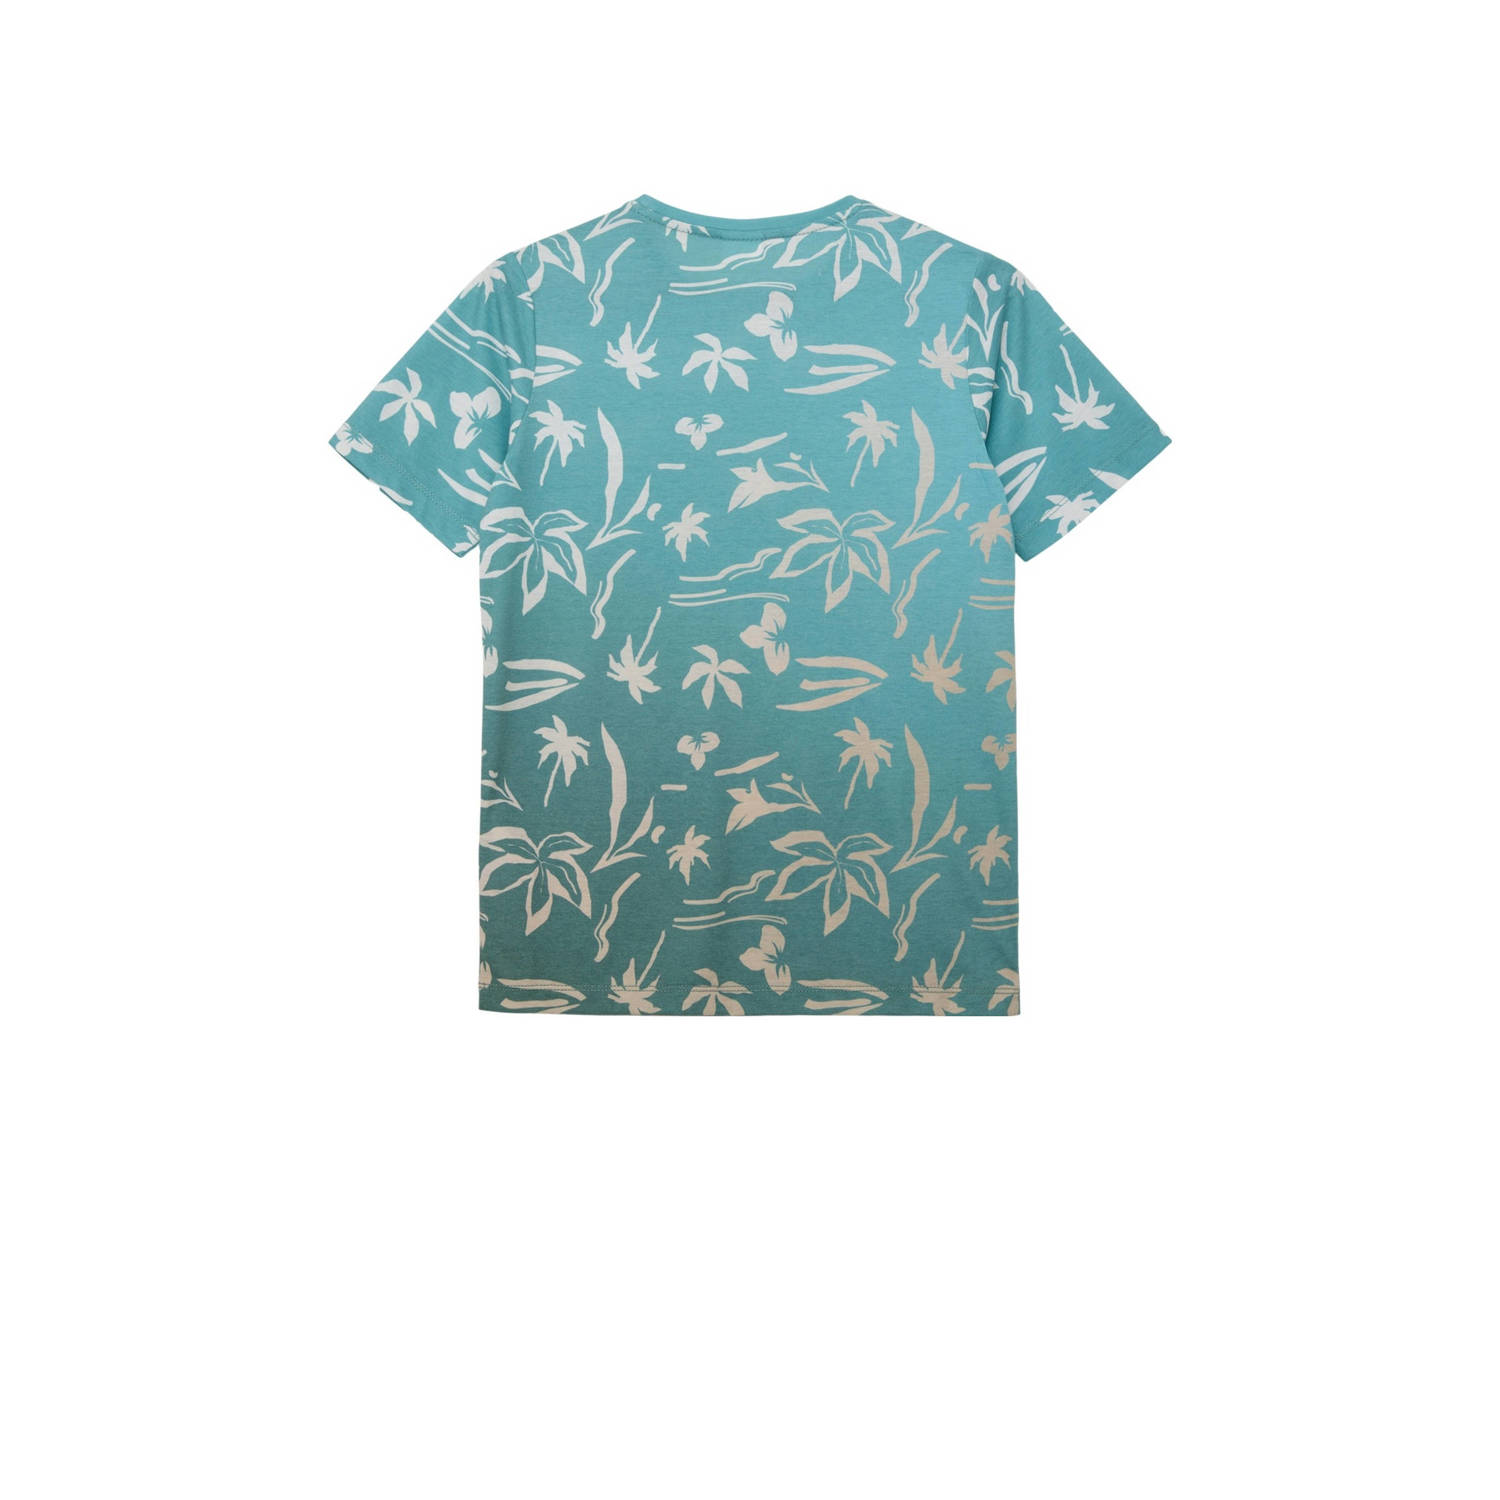 s.Oliver T-shirt met all over print petrol